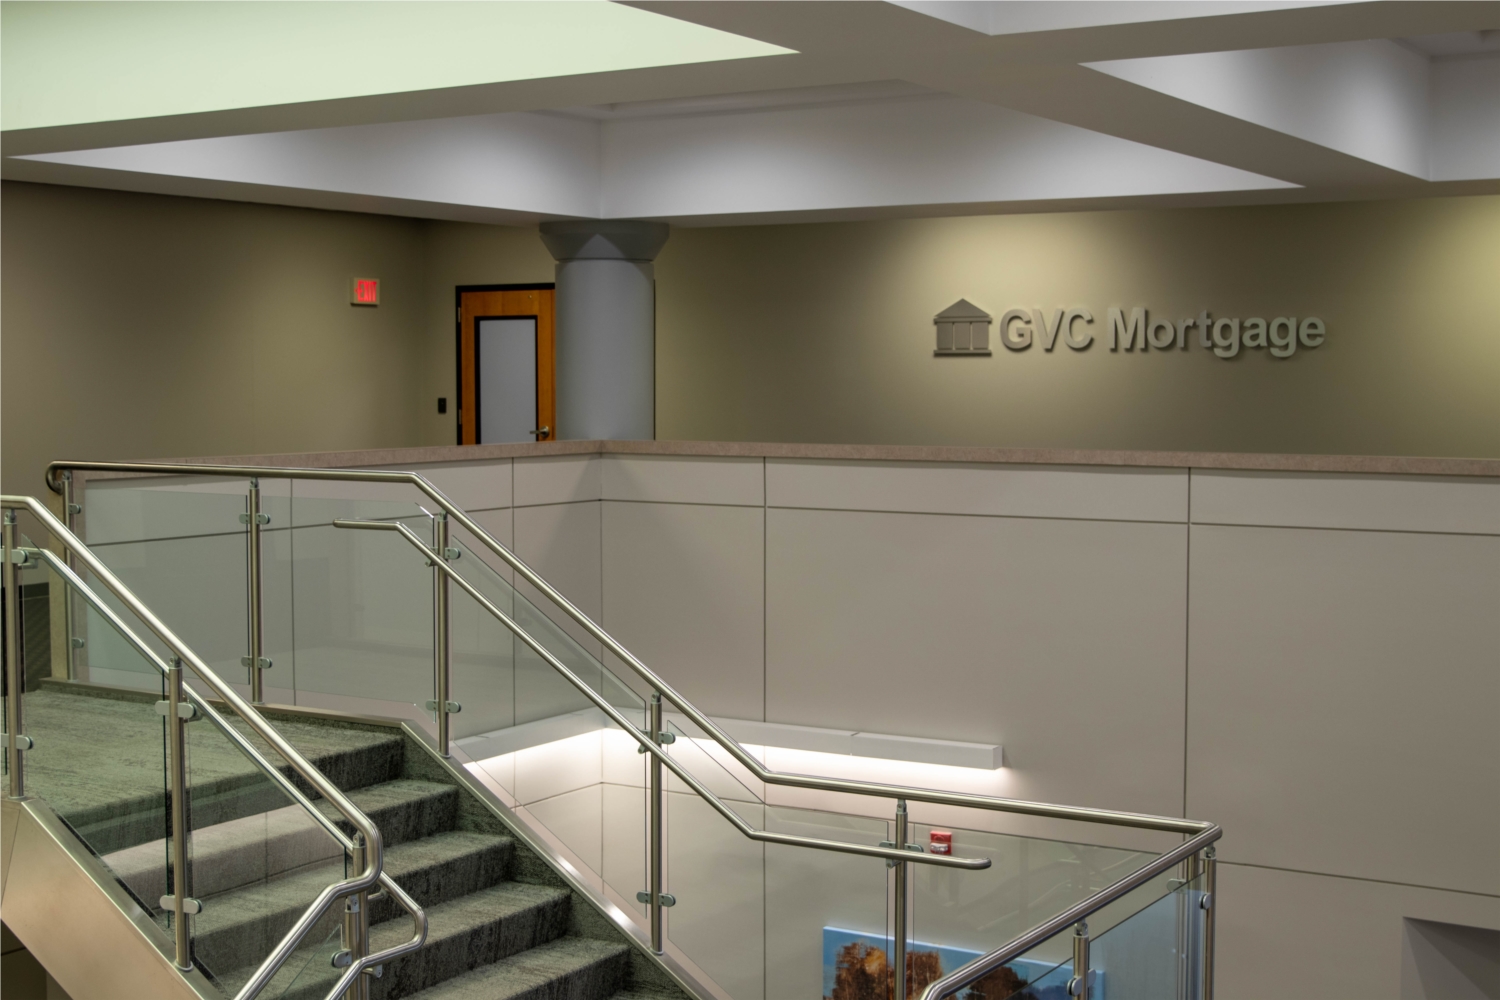 GVC Mortgage, Inc. corporate office entrance